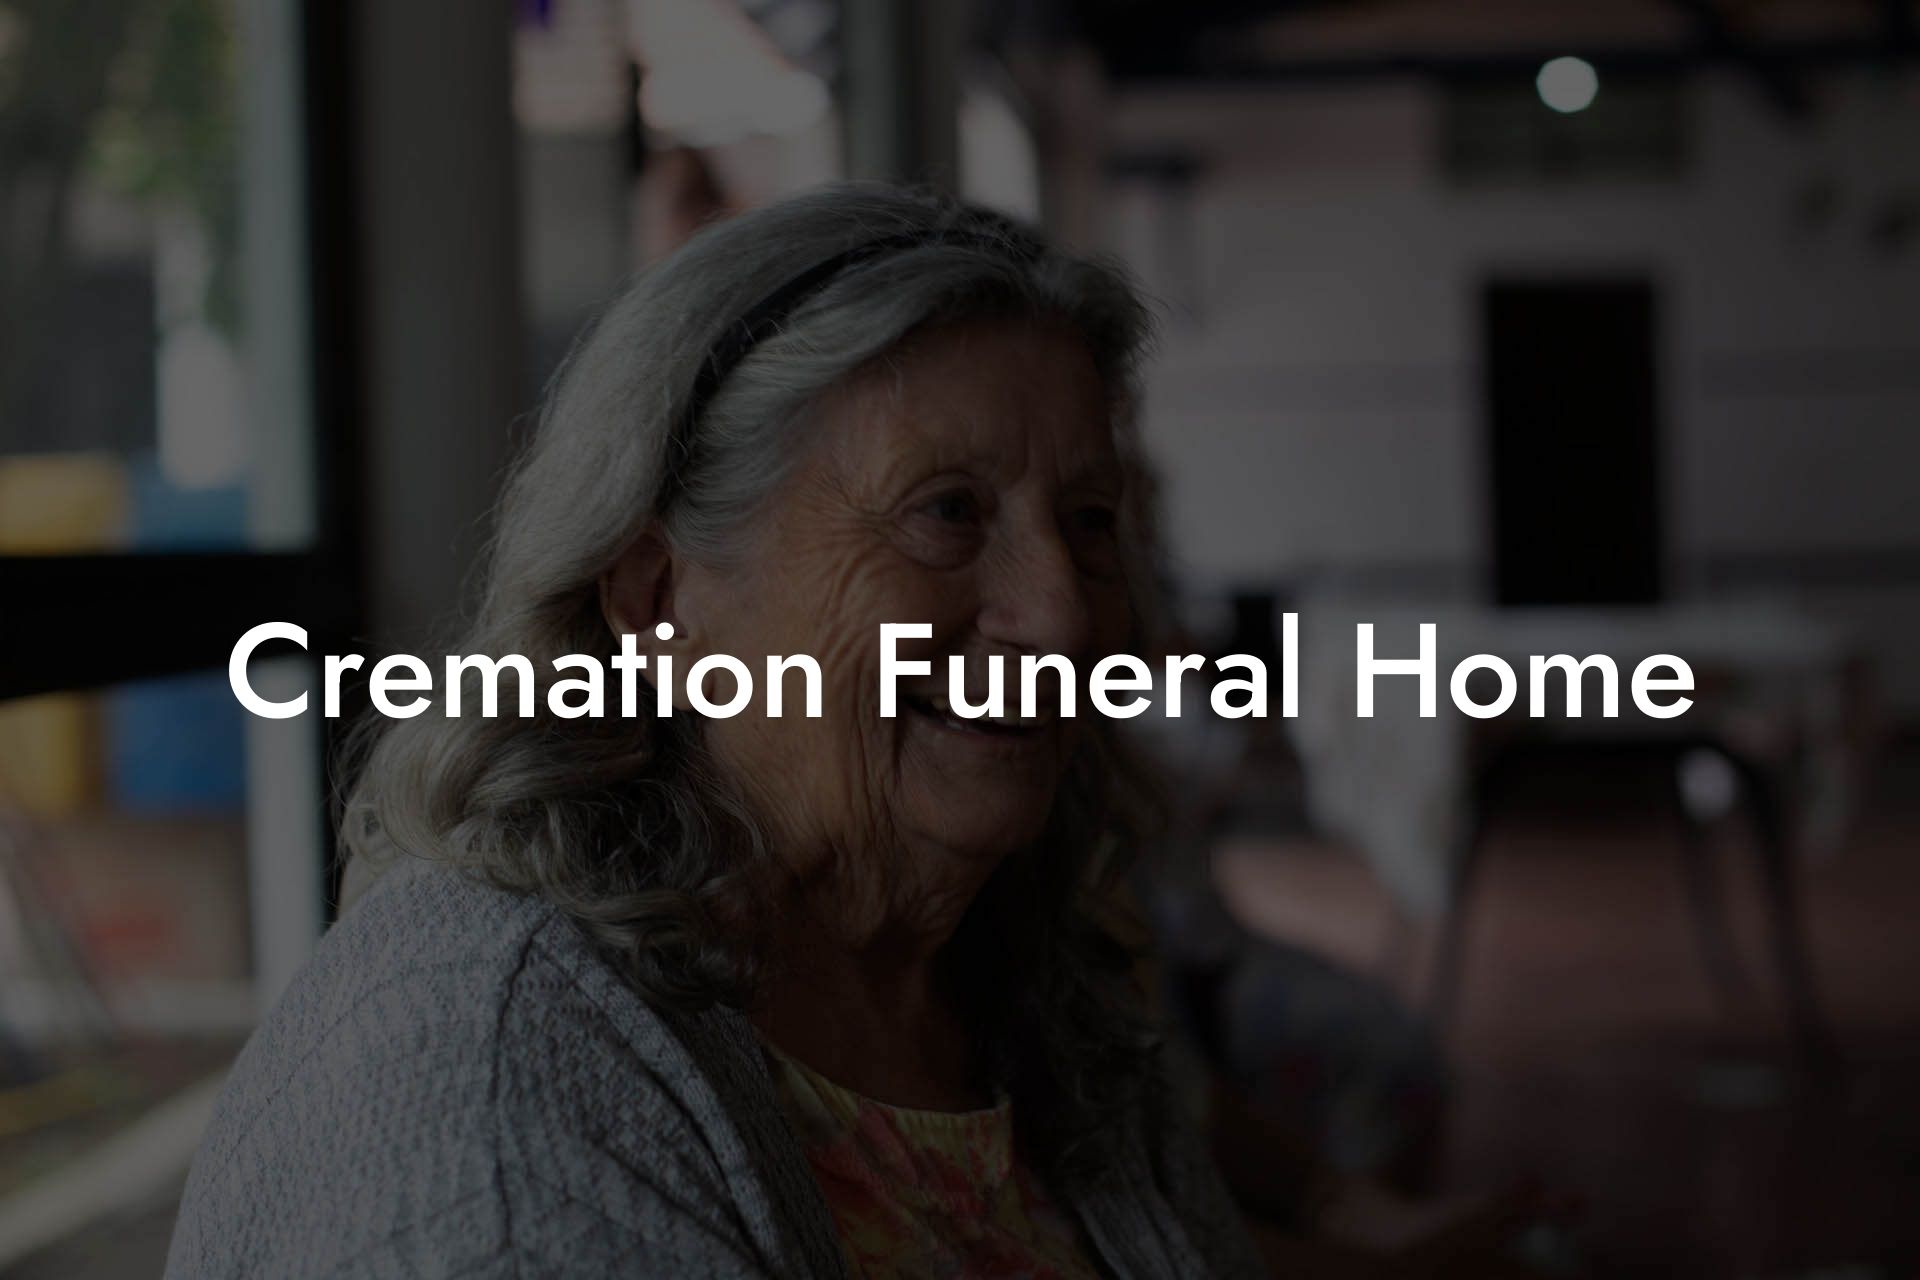 Cremation Funeral Home